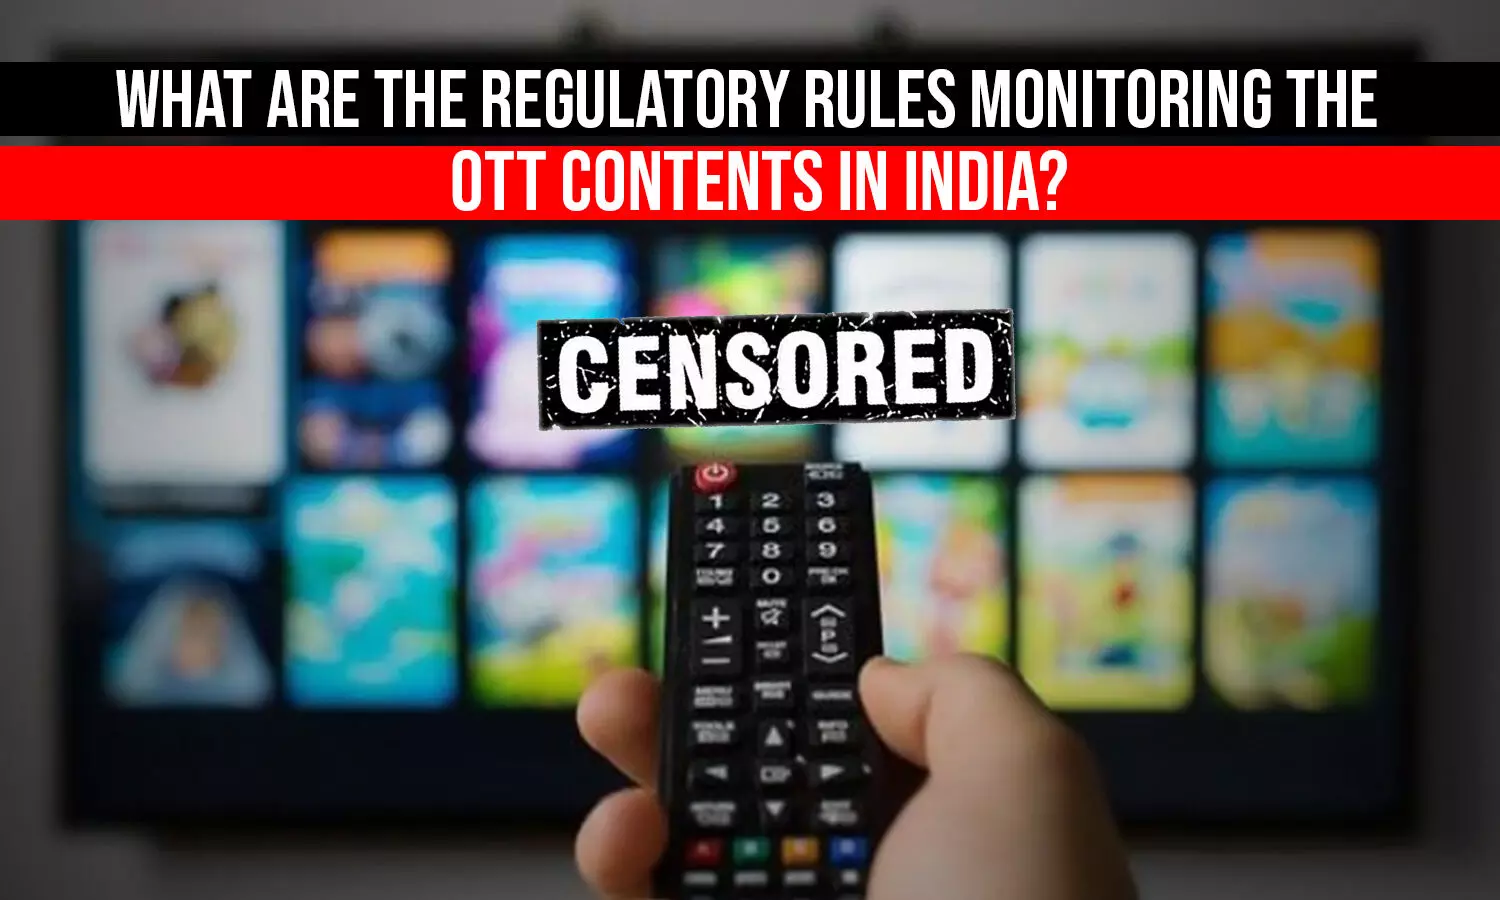 What Are The Regulatory Rules Monitoring the OTT Contents in India?